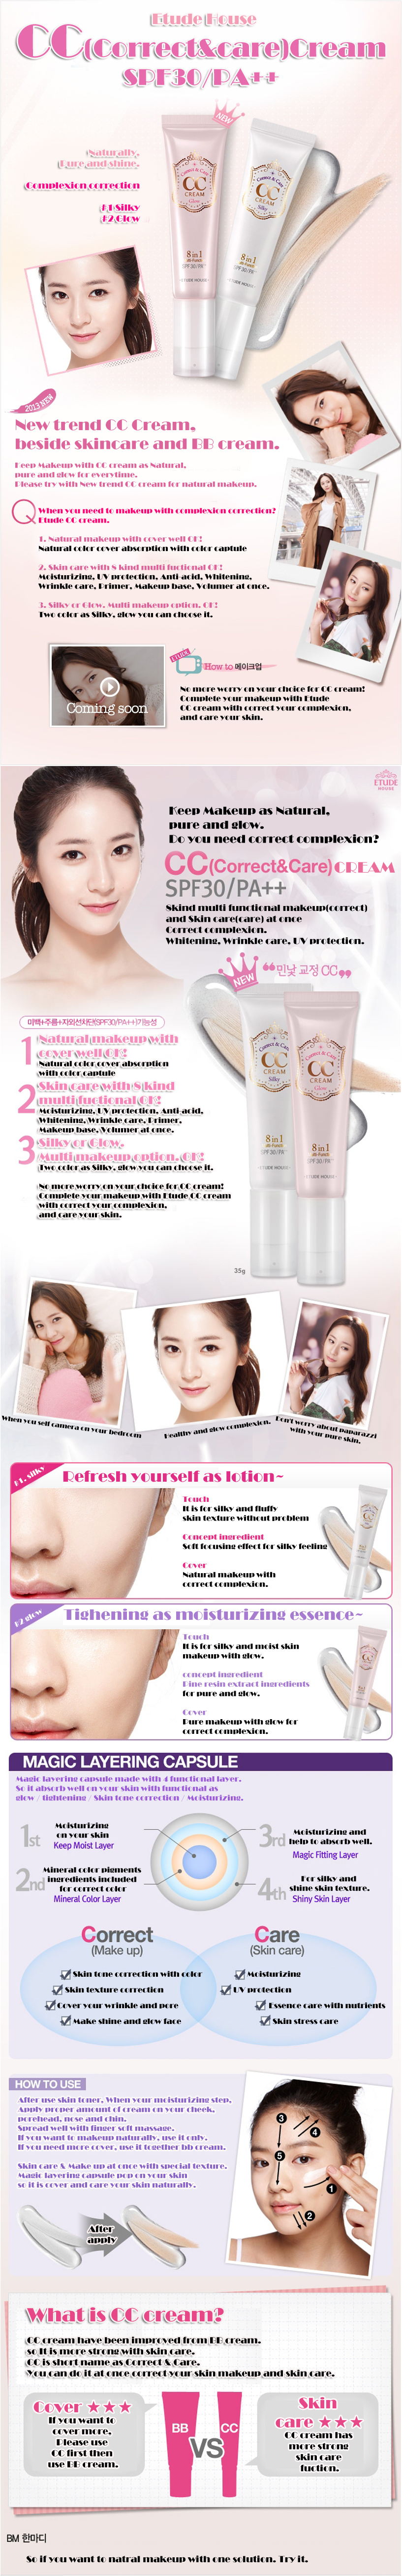 CC Cream Correct and Care SPF30PA++ 35g How to use Description Ingredinets